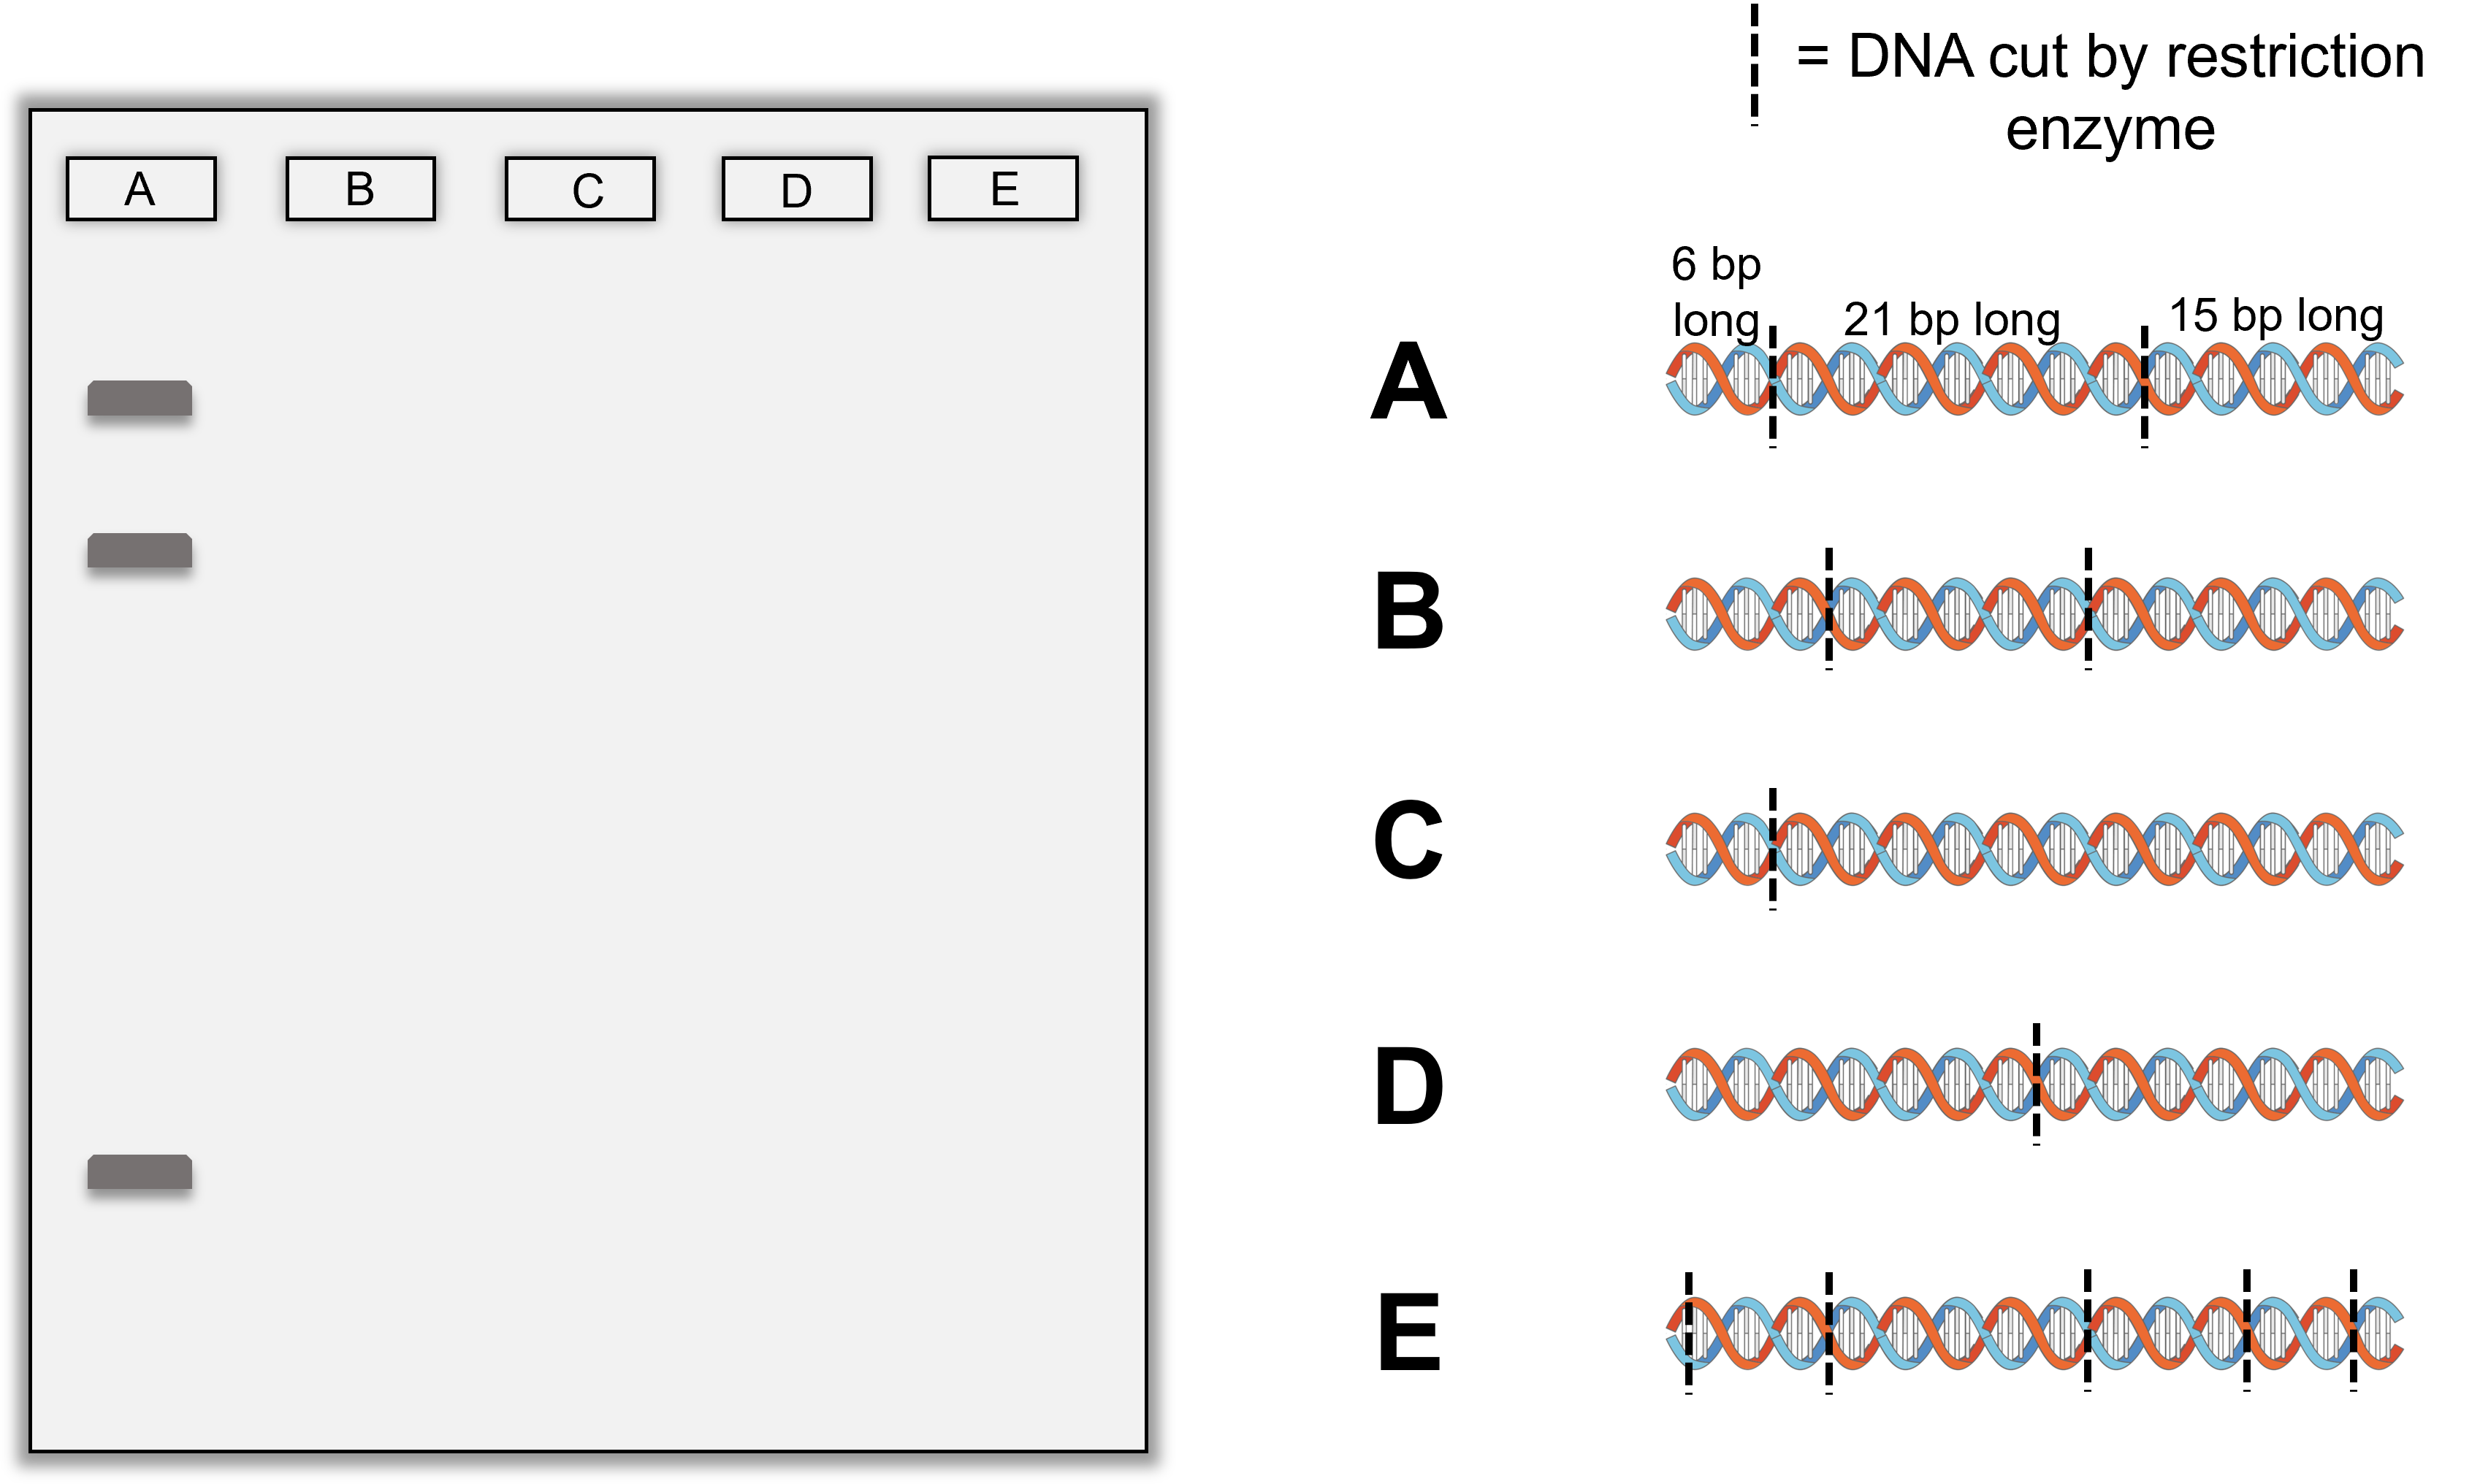 gel electrophoresis banding problem showing DNA molecules cut in different places along with the first banding pattern shown